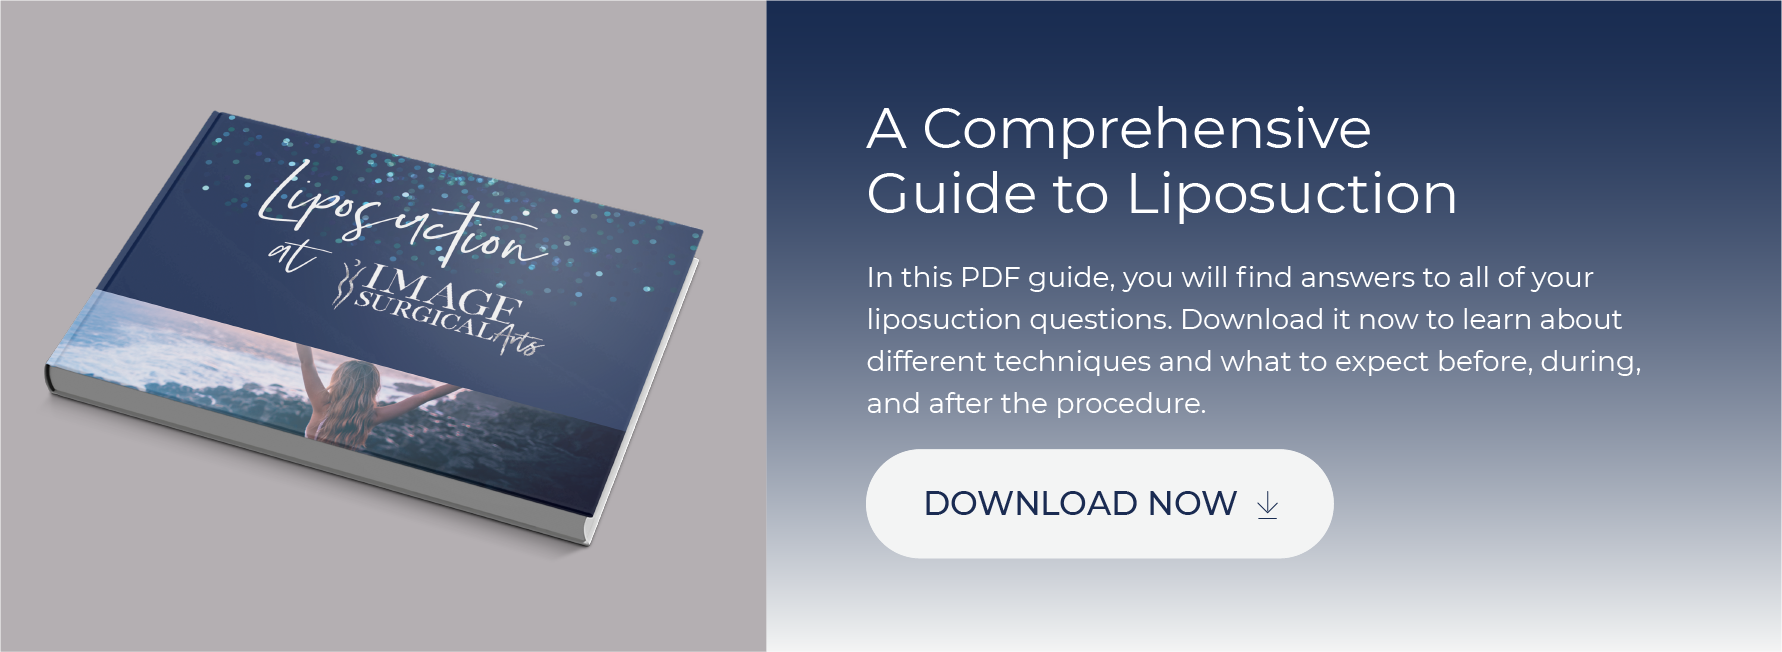 Free eBook: A Comprehensive Guide to Liposuction